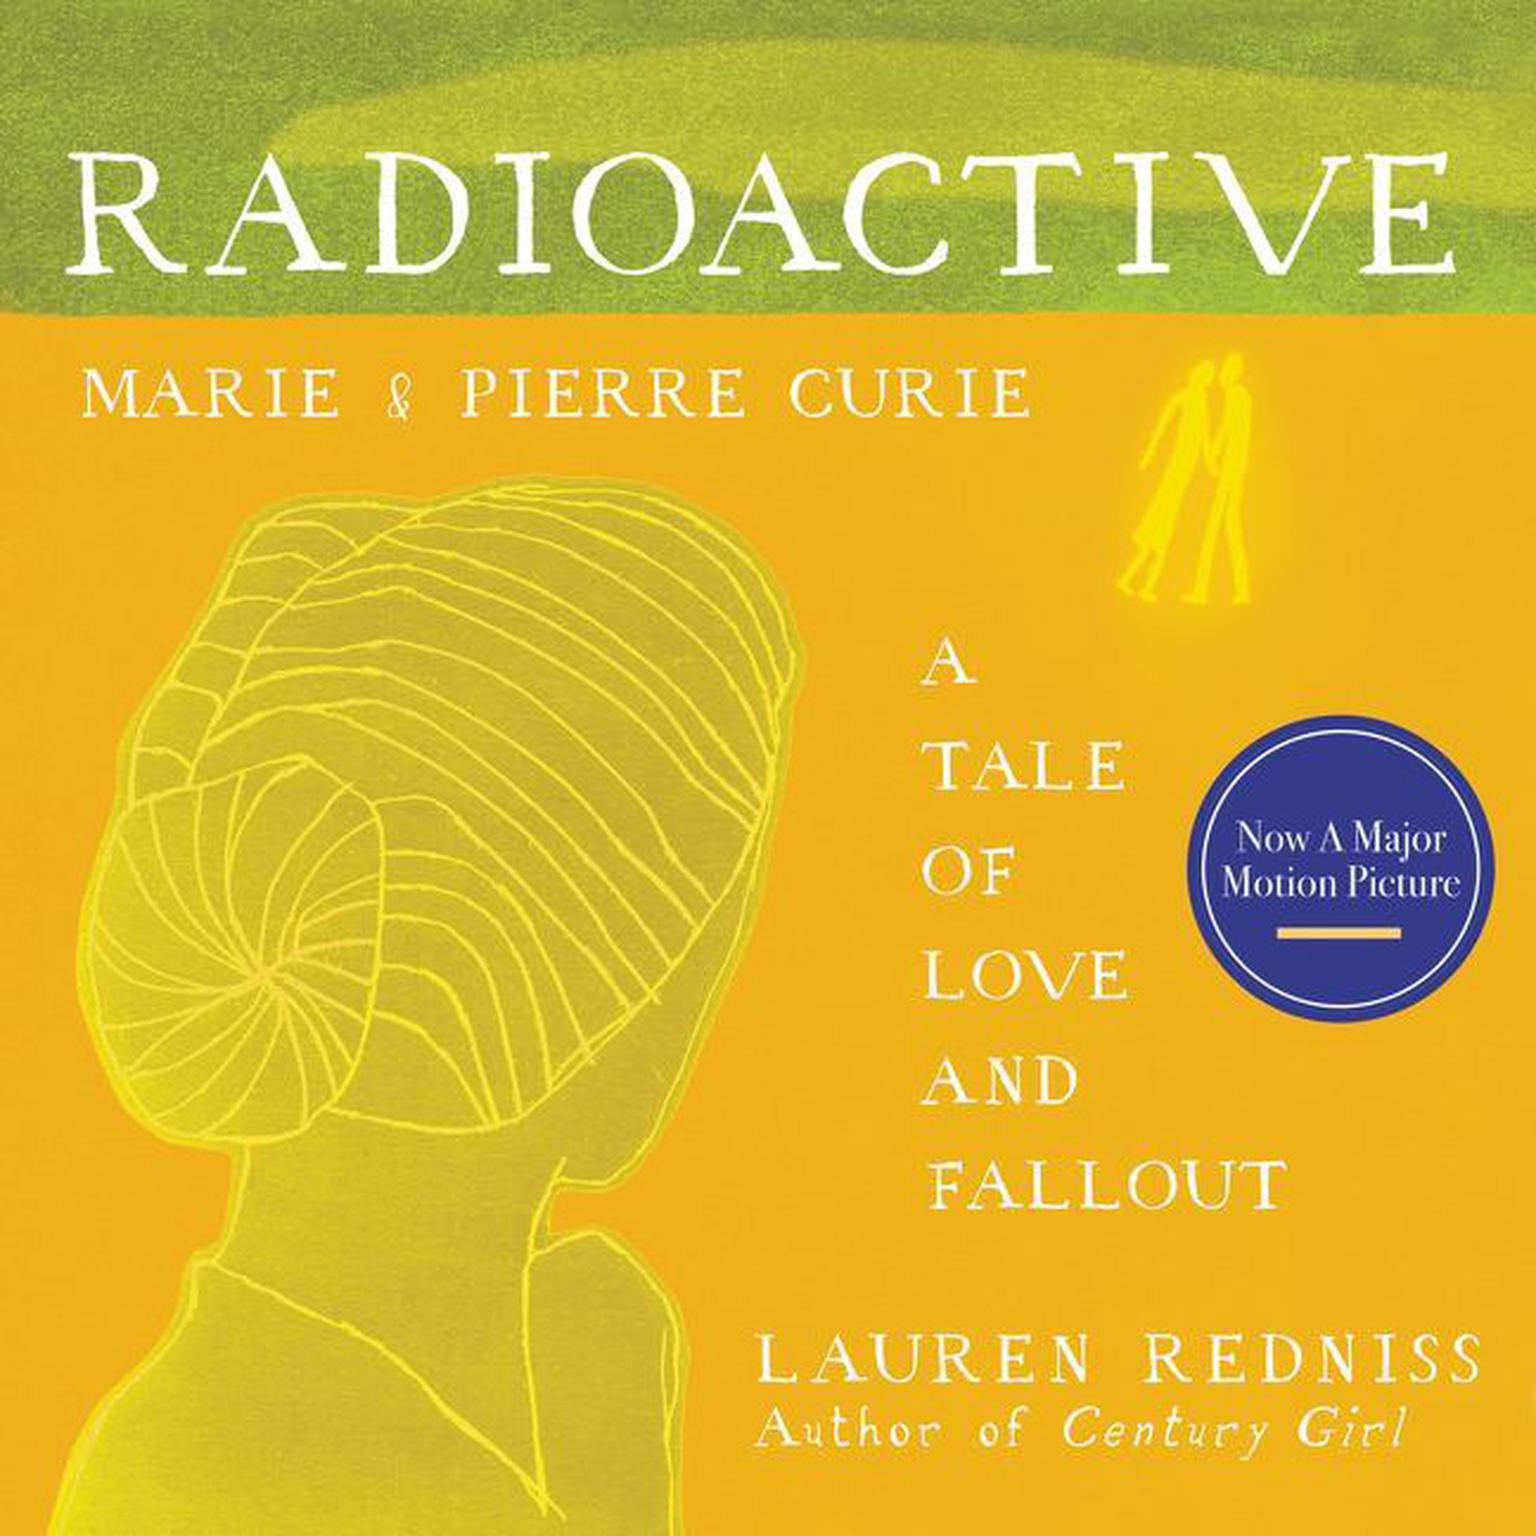 Radioactive: Marie & Pierre Curie: A Tale of Love and Fallout Audiobook, by Lauren Redniss